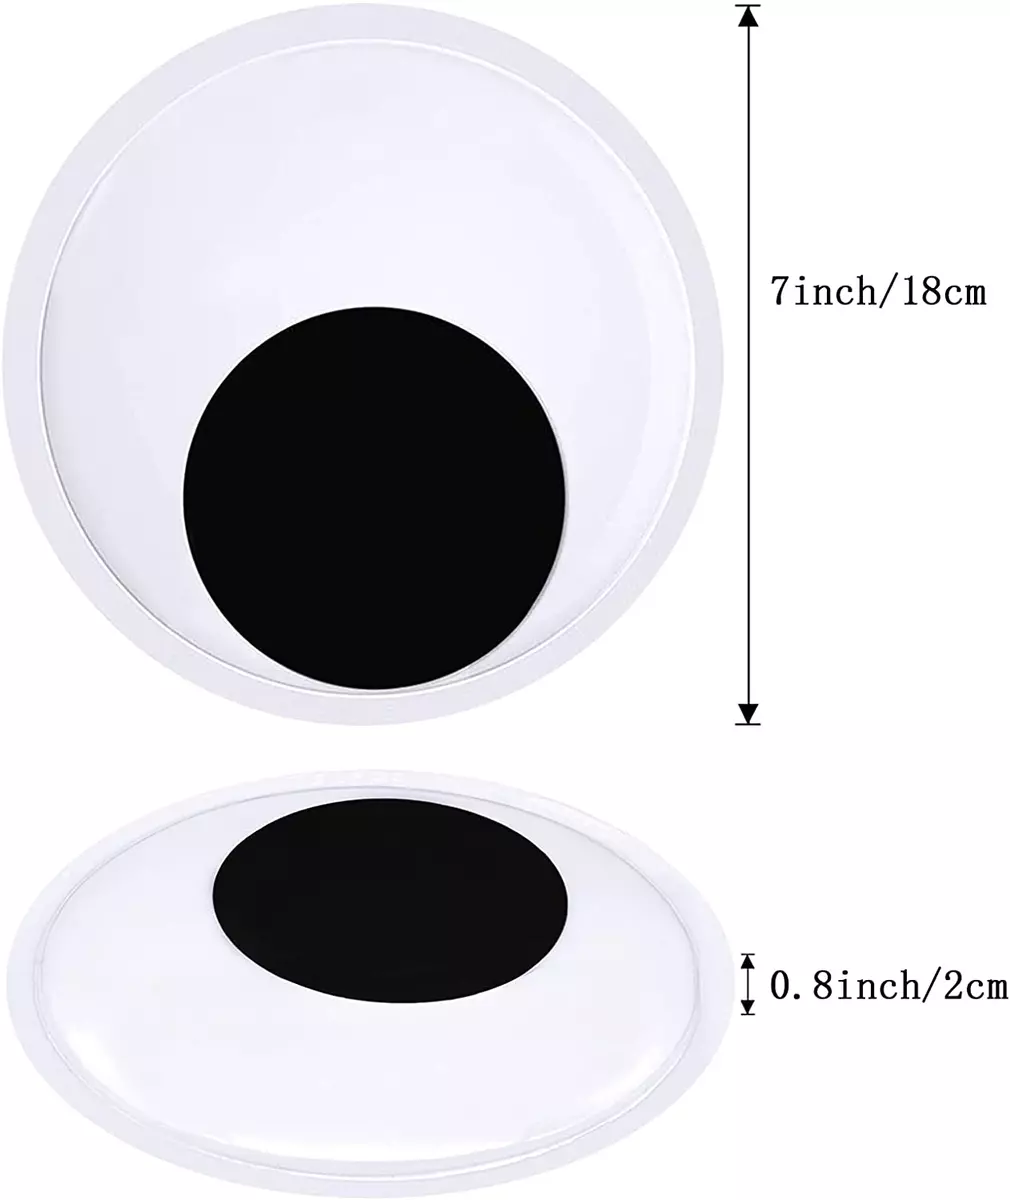 7 Inch Giant Googly Eyes Plastic Wiggle Eyes with Self Adhesive